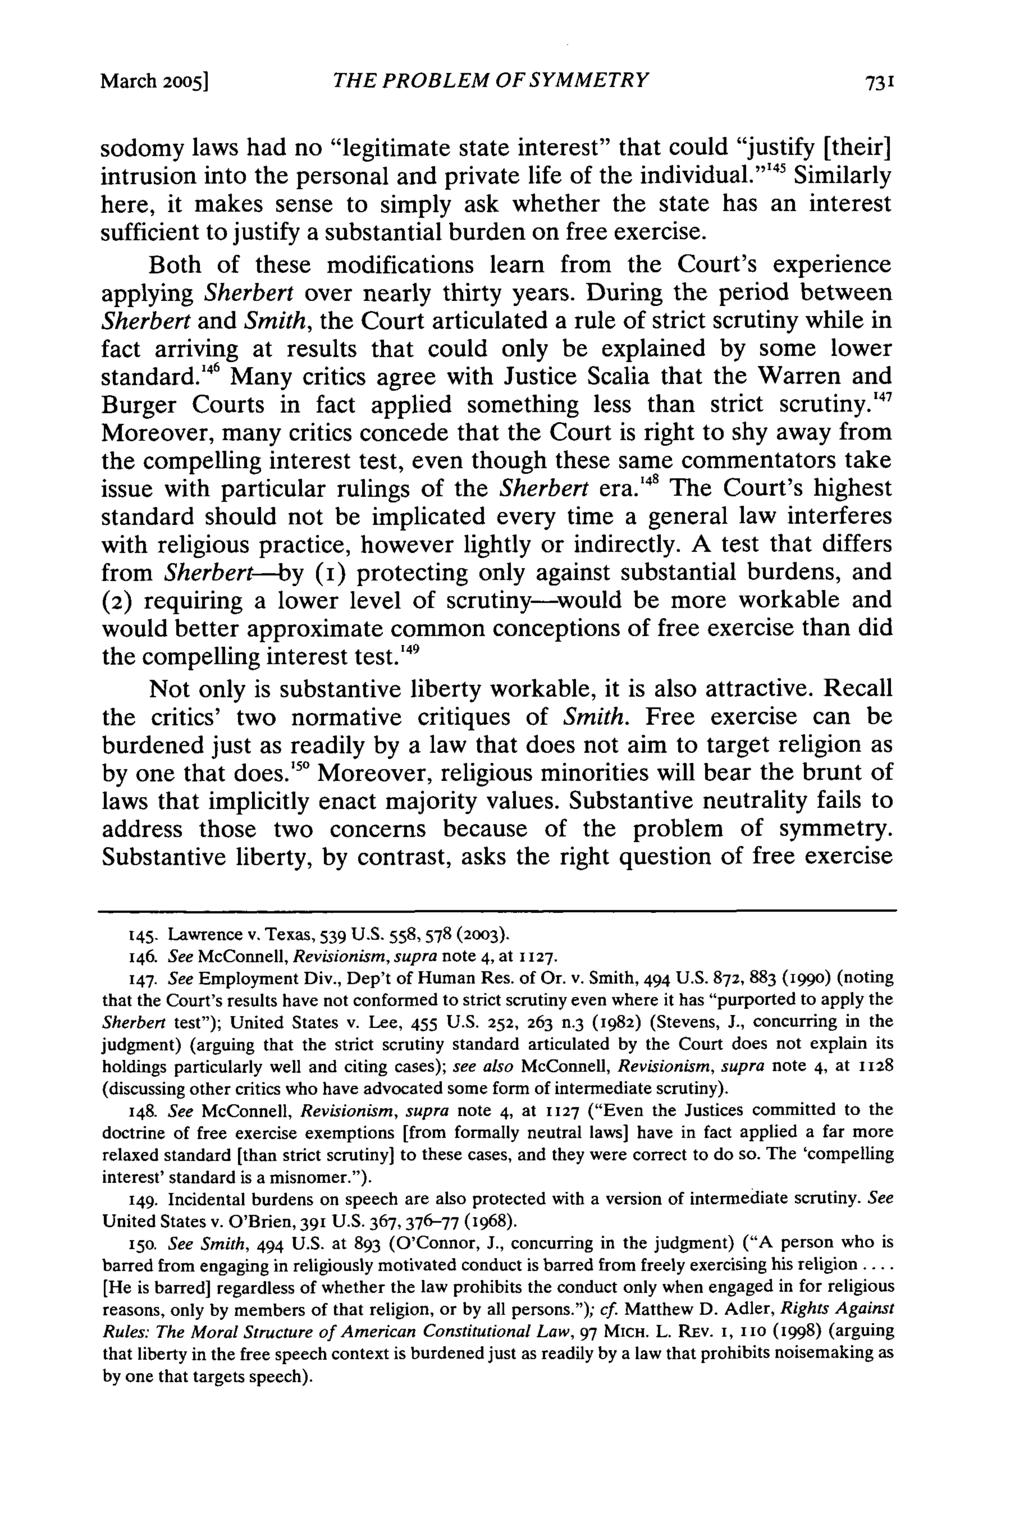 March 2005] THE PROBLEM OF SYMMETRY sodomy laws had no "legitimate state interest" that could "justify [their] intrusion into the personal and private life of the individual.